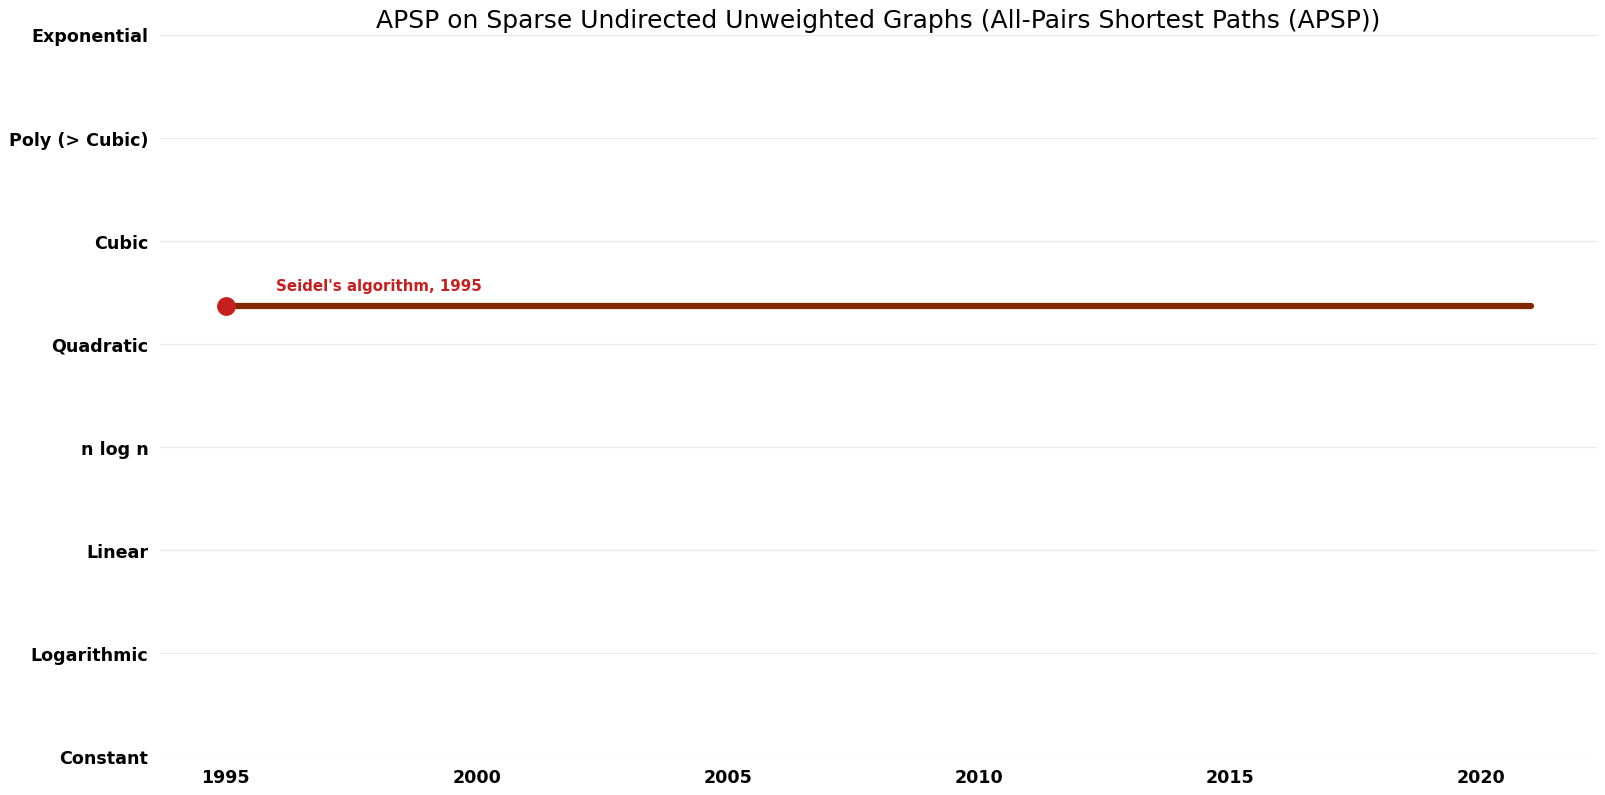 All-Pairs Shortest Paths (APSP) - APSP on Sparse Undirected Unweighted Graphs - Time.png